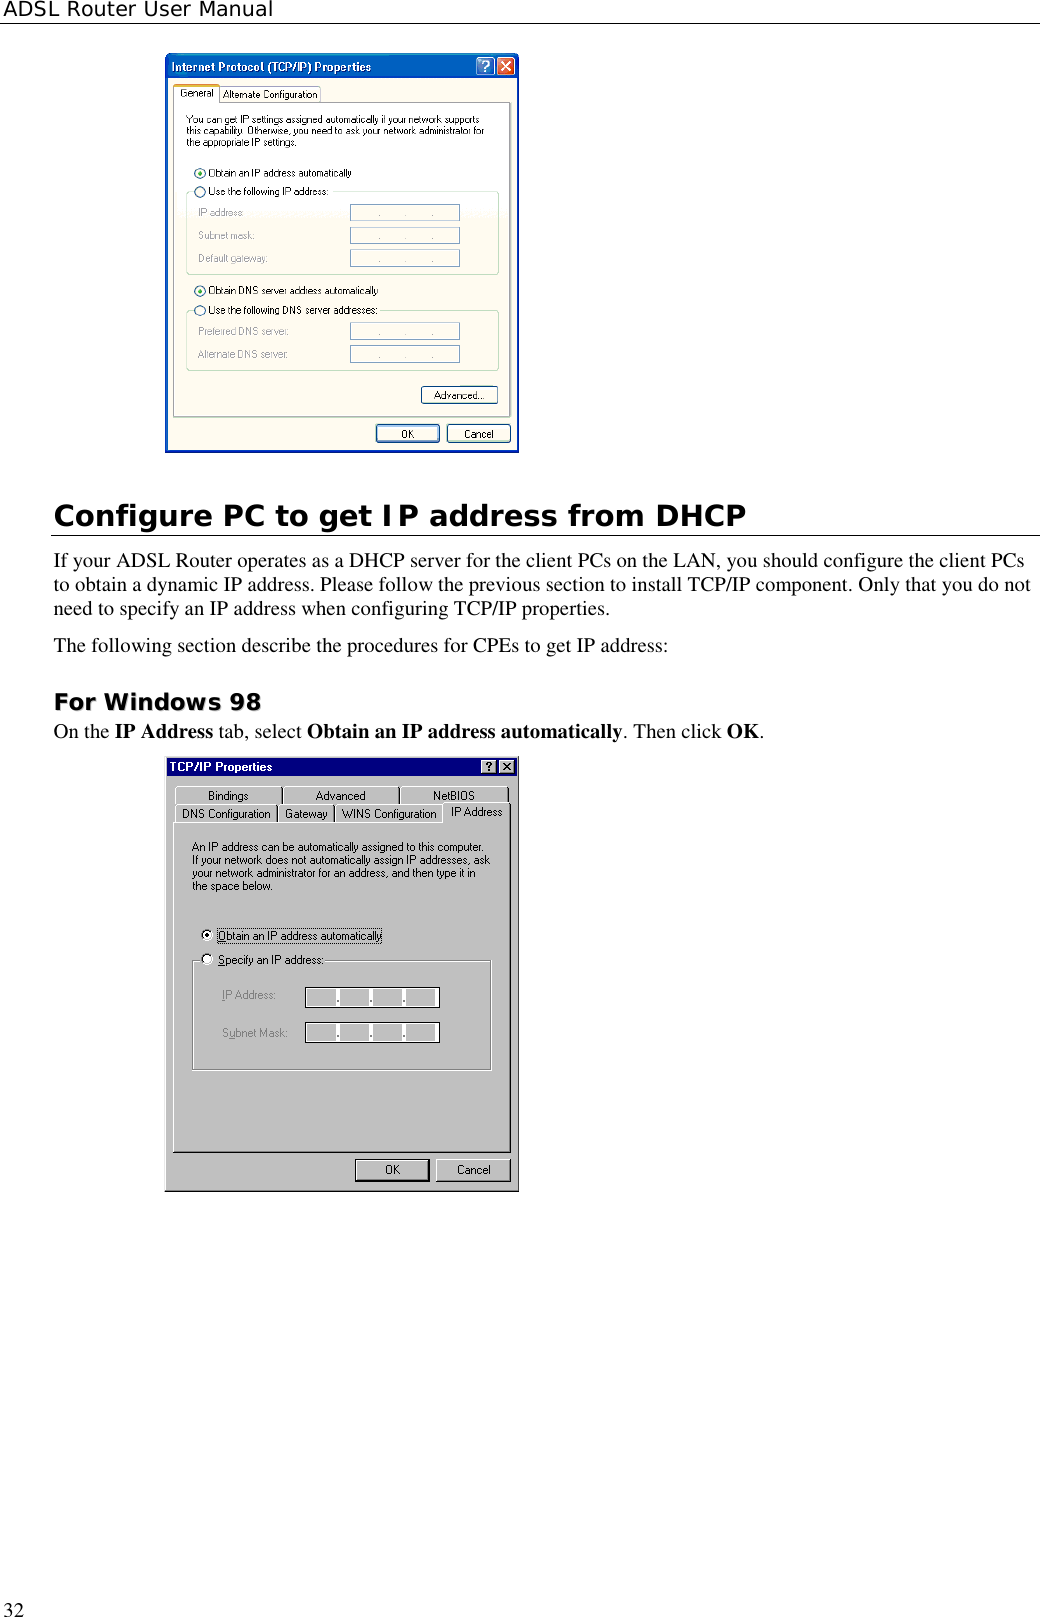 ADSL Router User Manual32Configure PC to get IP address from DHCPIf your ADSL Router operates as a DHCP server for the client PCs on the LAN, you should configure the client PCsto obtain a dynamic IP address. Please follow the previous section to install TCP/IP component. Only that you do notneed to specify an IP address when configuring TCP/IP properties.The following section describe the procedures for CPEs to get IP address:FFoorr  WWiinnddoowwss  9988On the IP Address tab, select Obtain an IP address automatically. Then click OK.